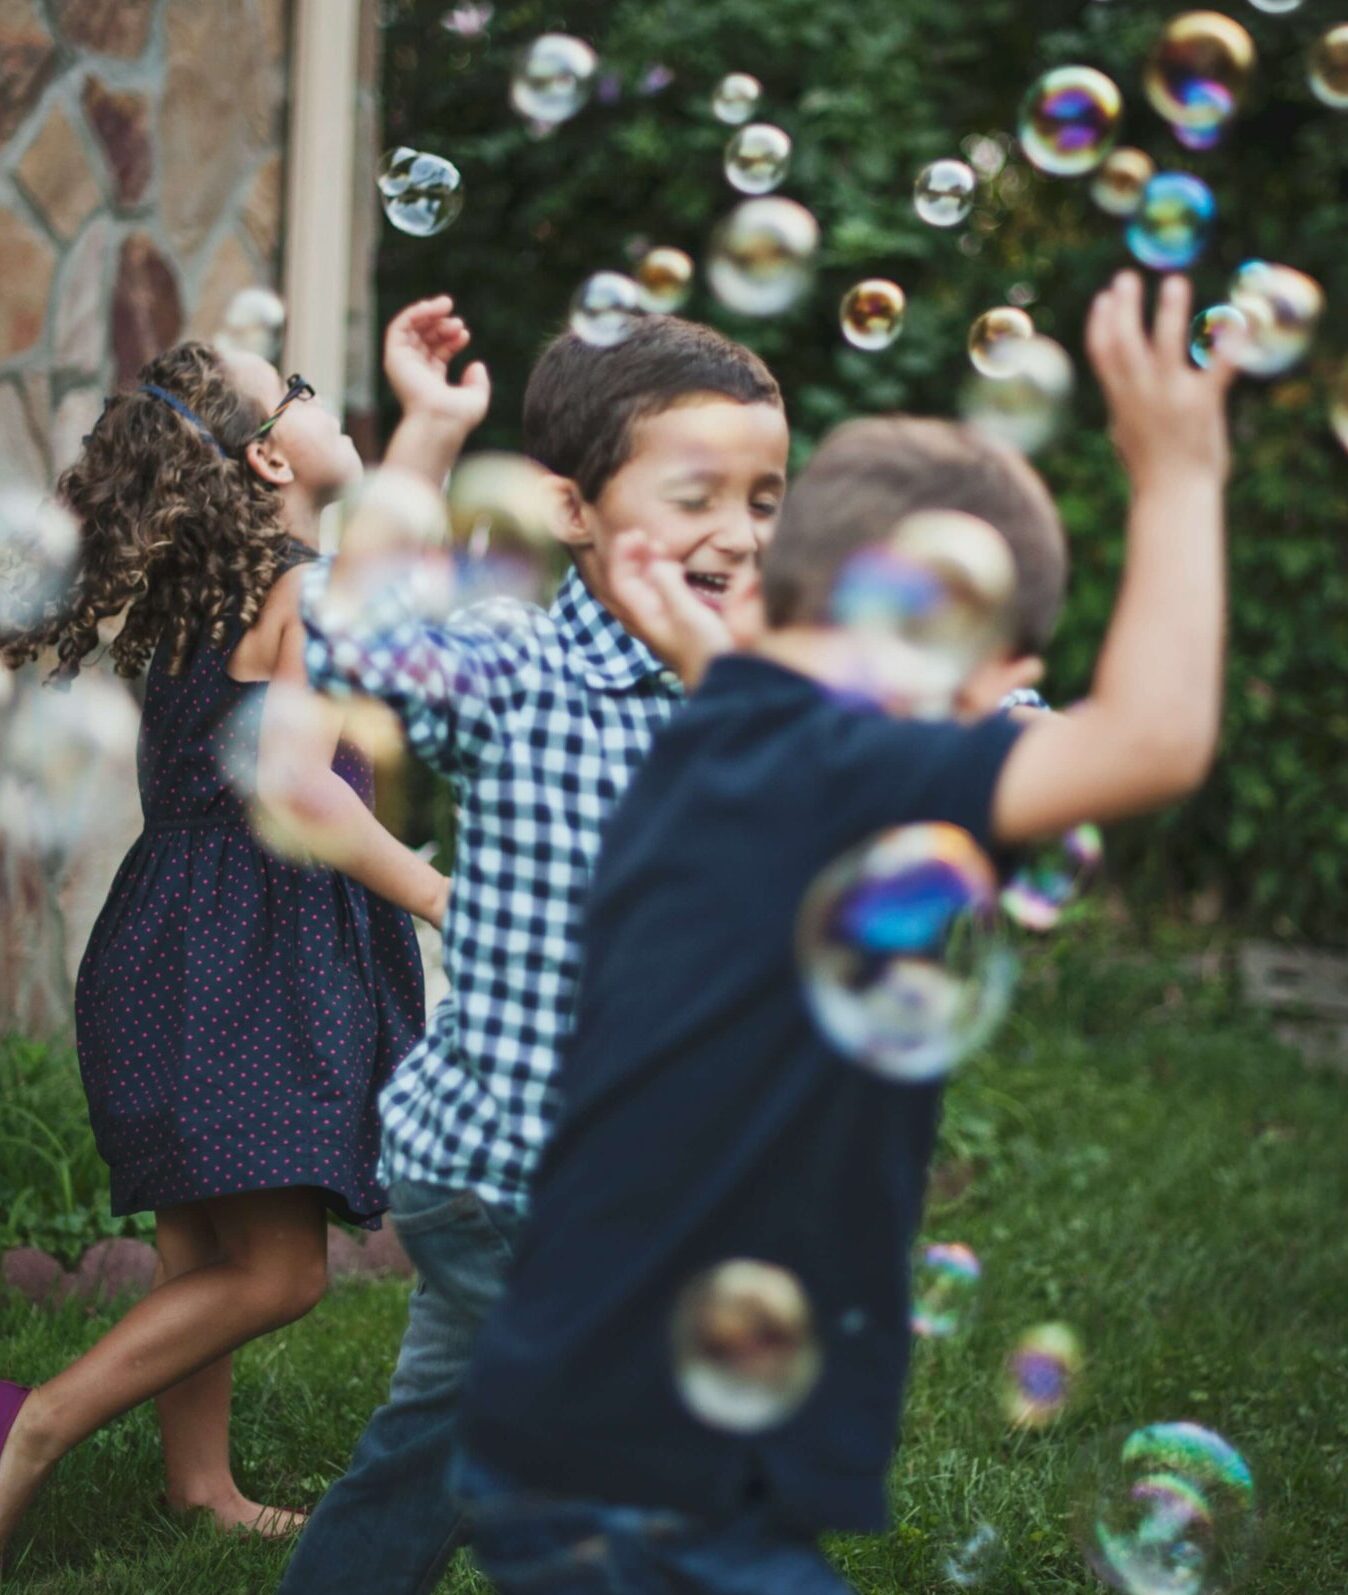 Image of children smiling and running through bubbles. If your child's anxiety symptoms are being disruptive in their life, discover how anxiety therapy in Saint Petersburg, FL can help.